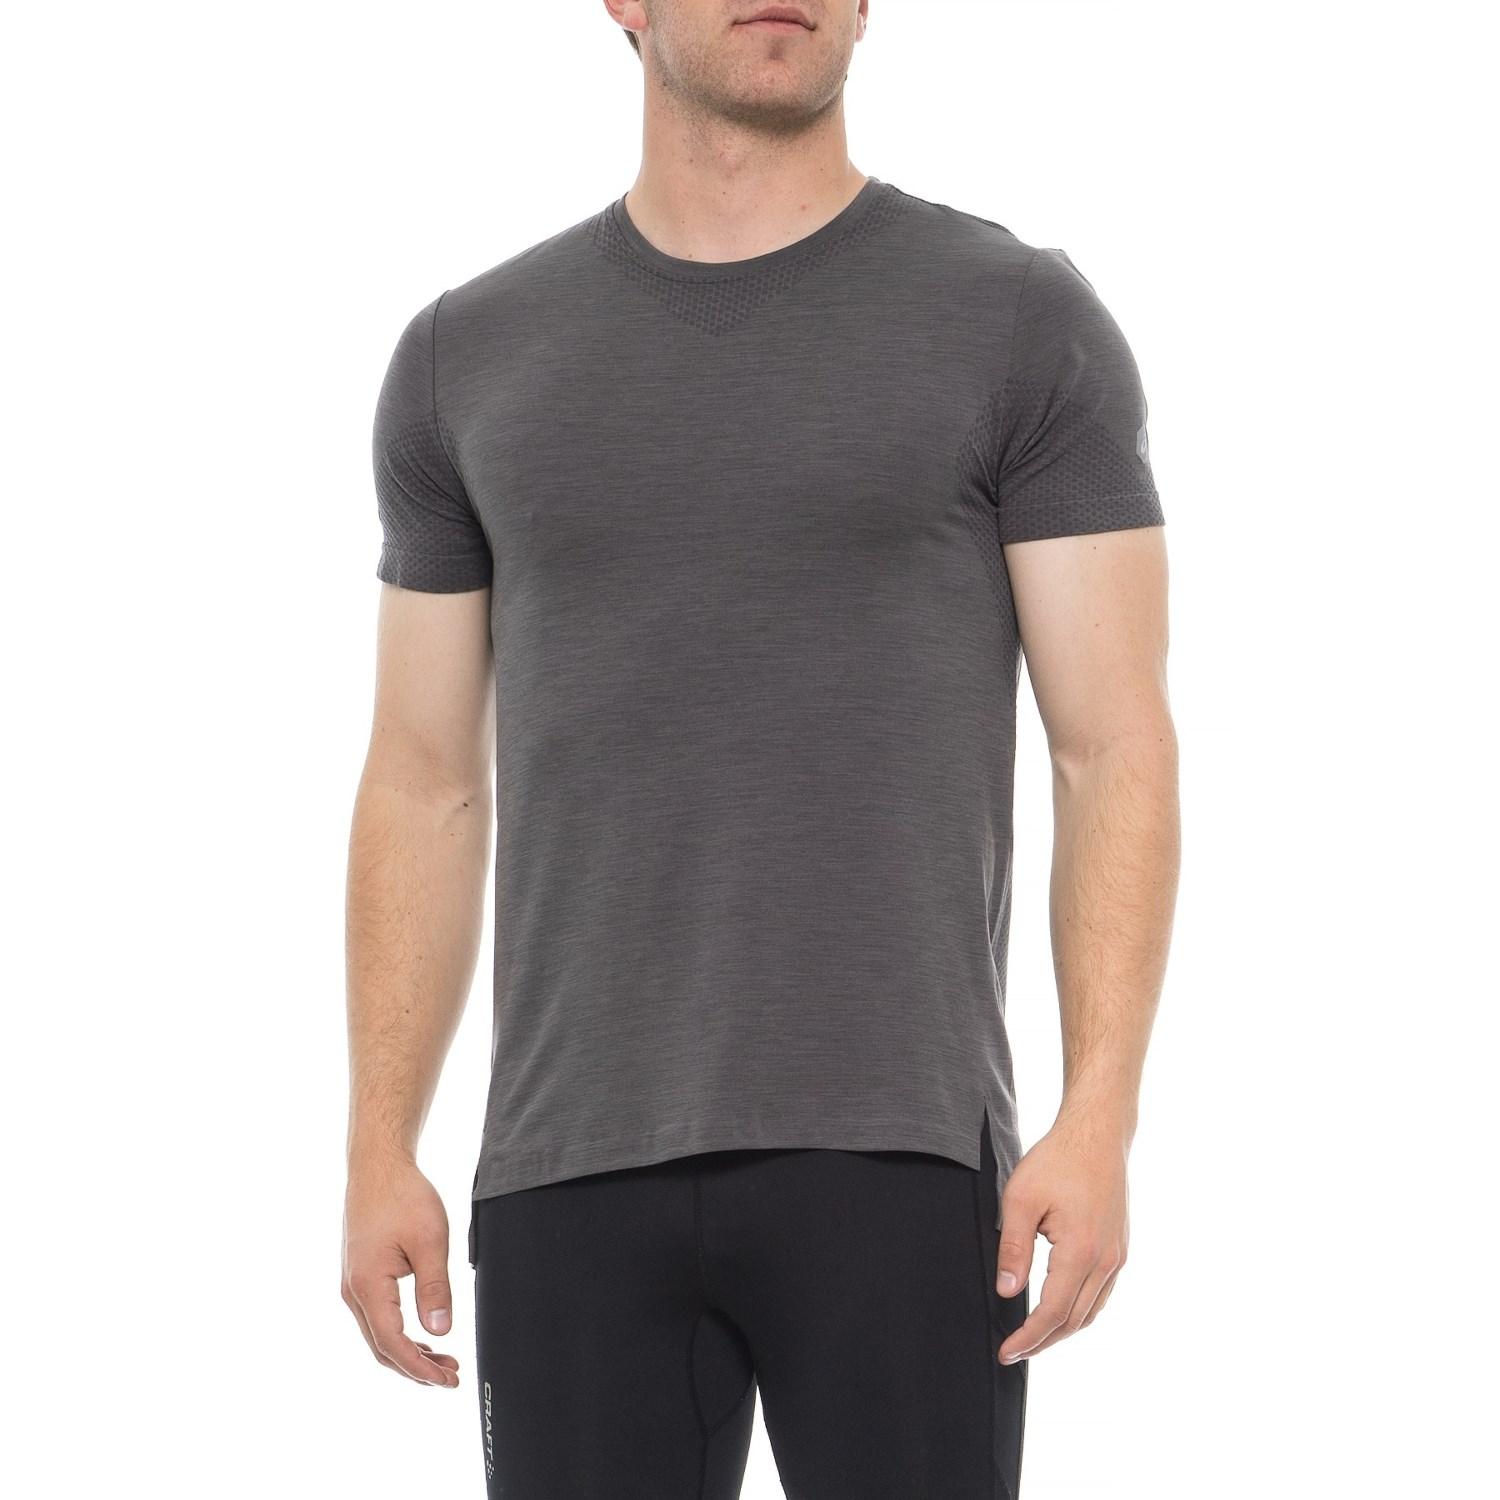 Asics Synthetic Seamless Shirt in Dark Grey Heather (Gray) for Men - Lyst